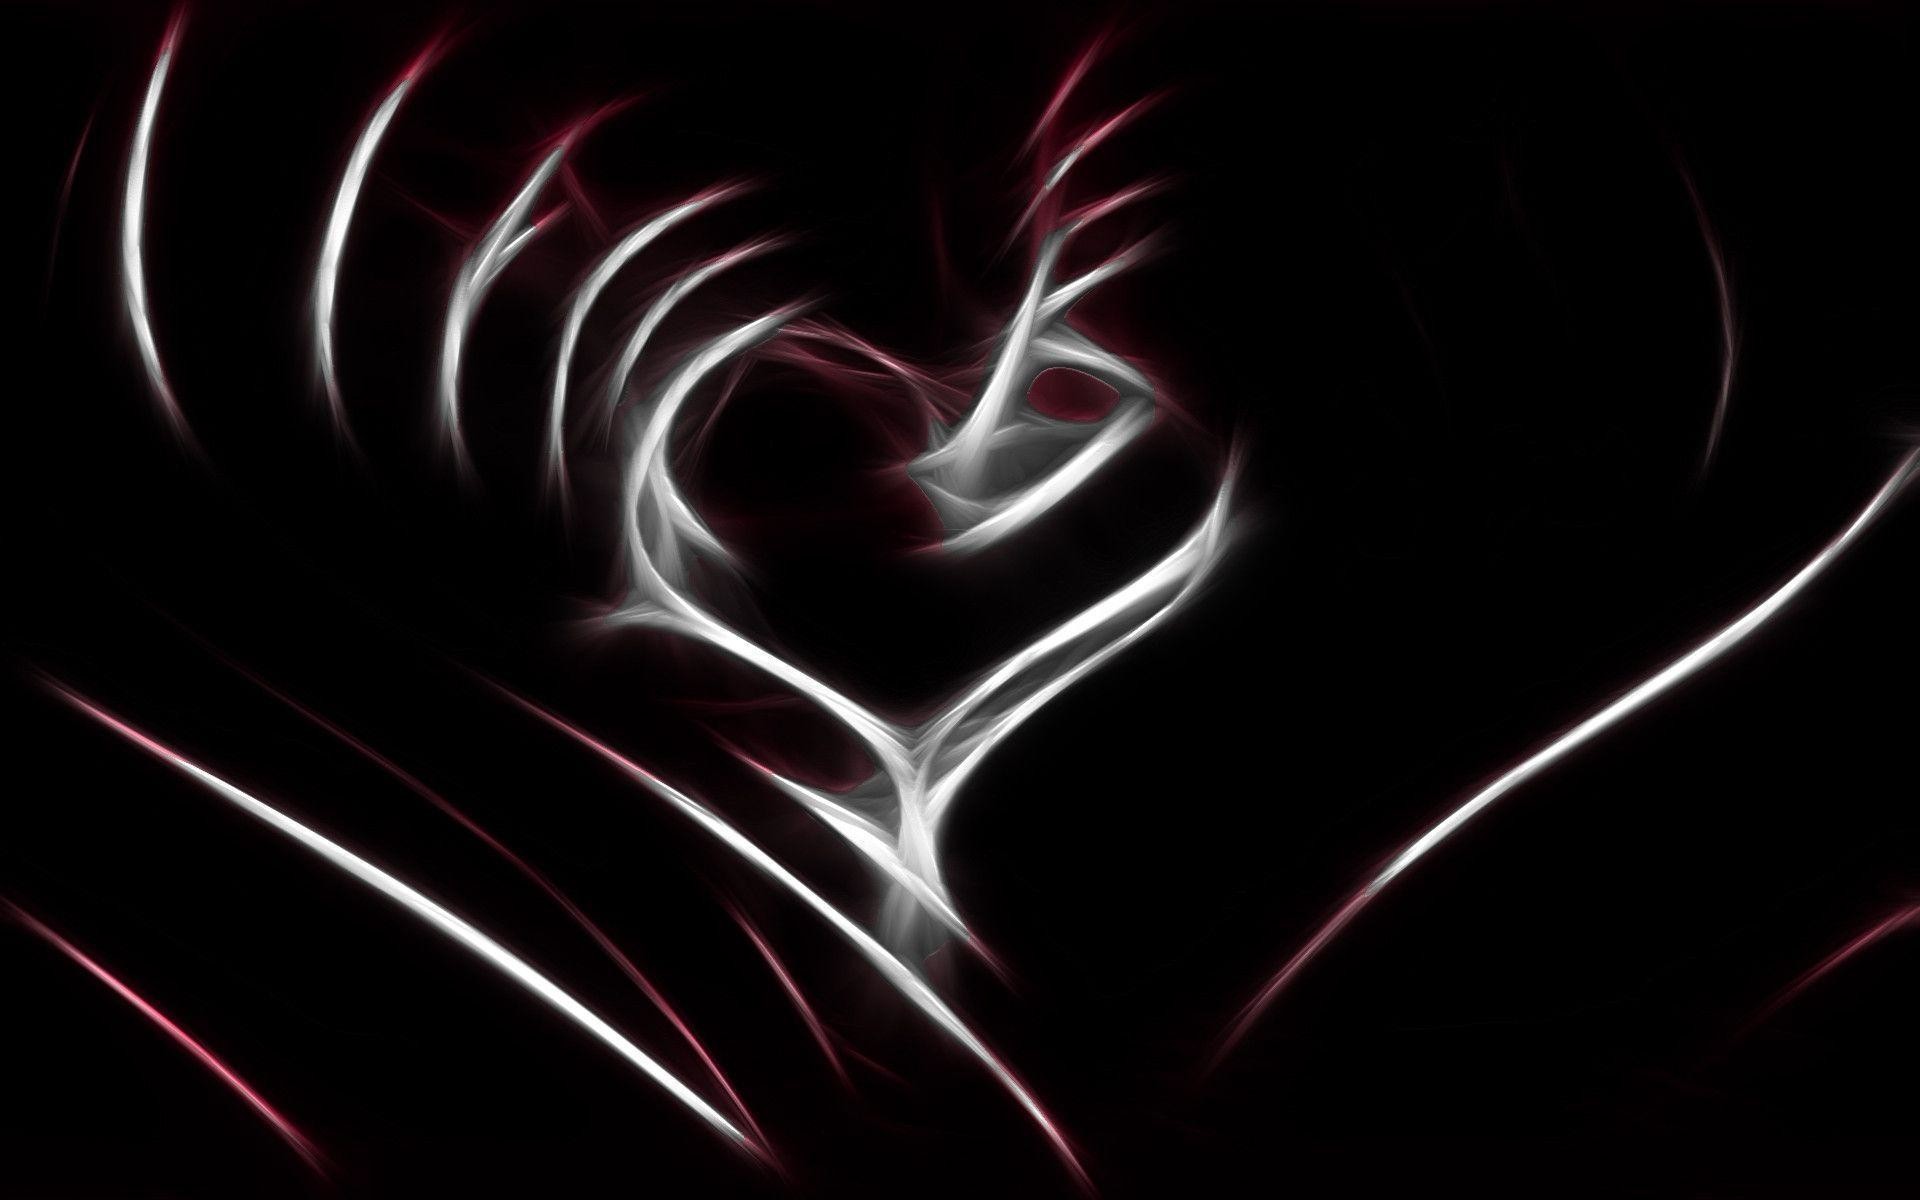 Black Heart Love HD Backgrounds | High Definition Wallpapers